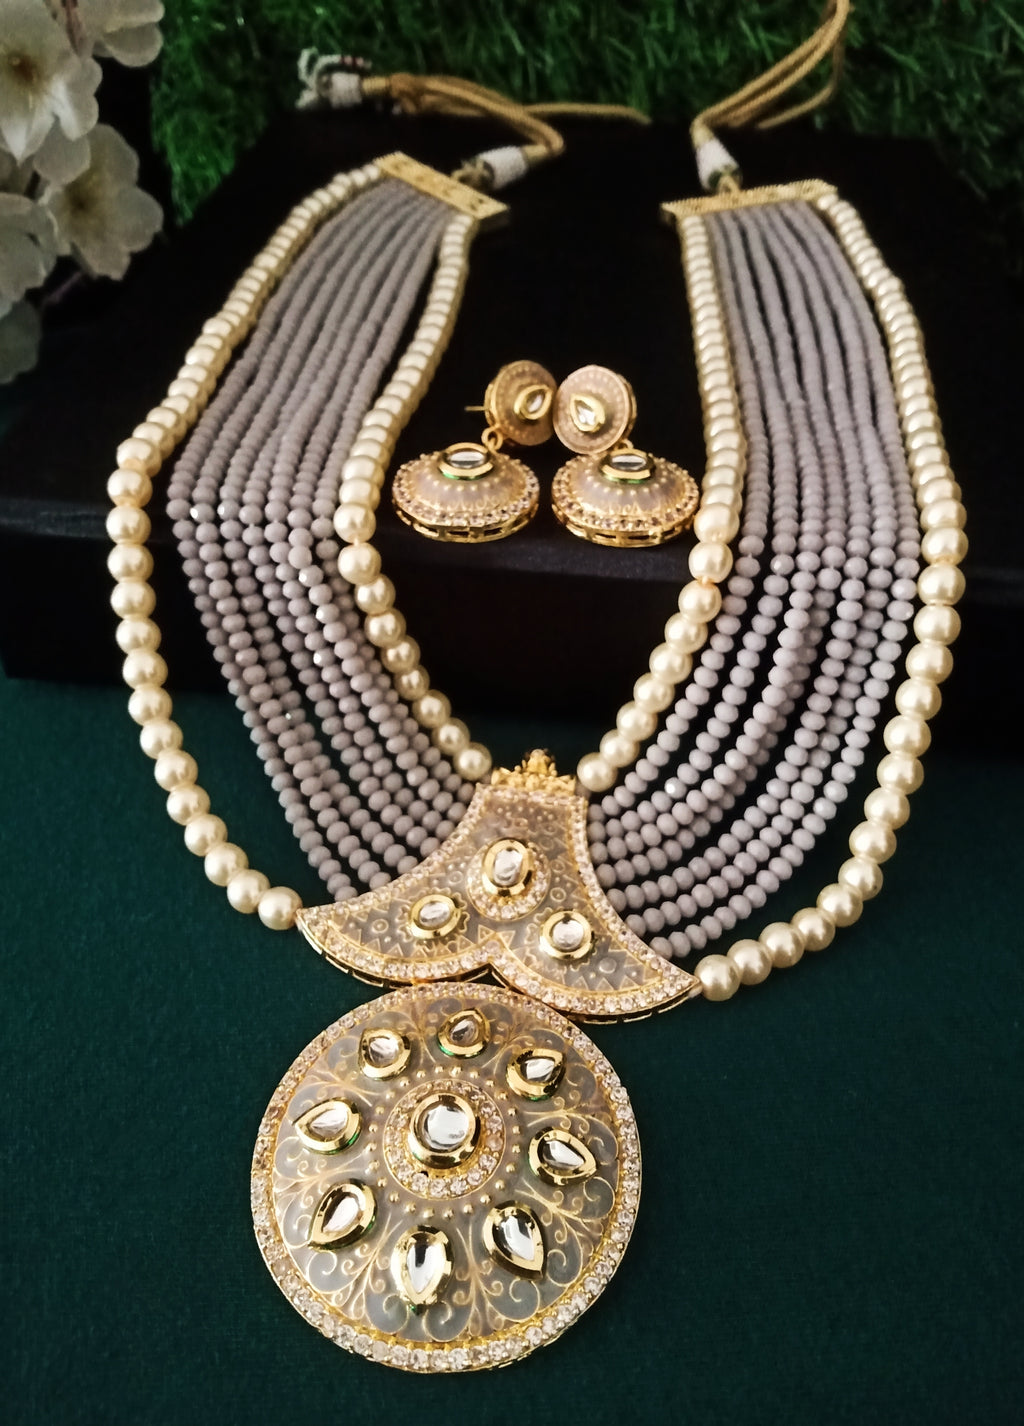 N0130_Gorgeous elaborated grey Crystal layered necklace set studded with kundan stones with a touch of pearls.